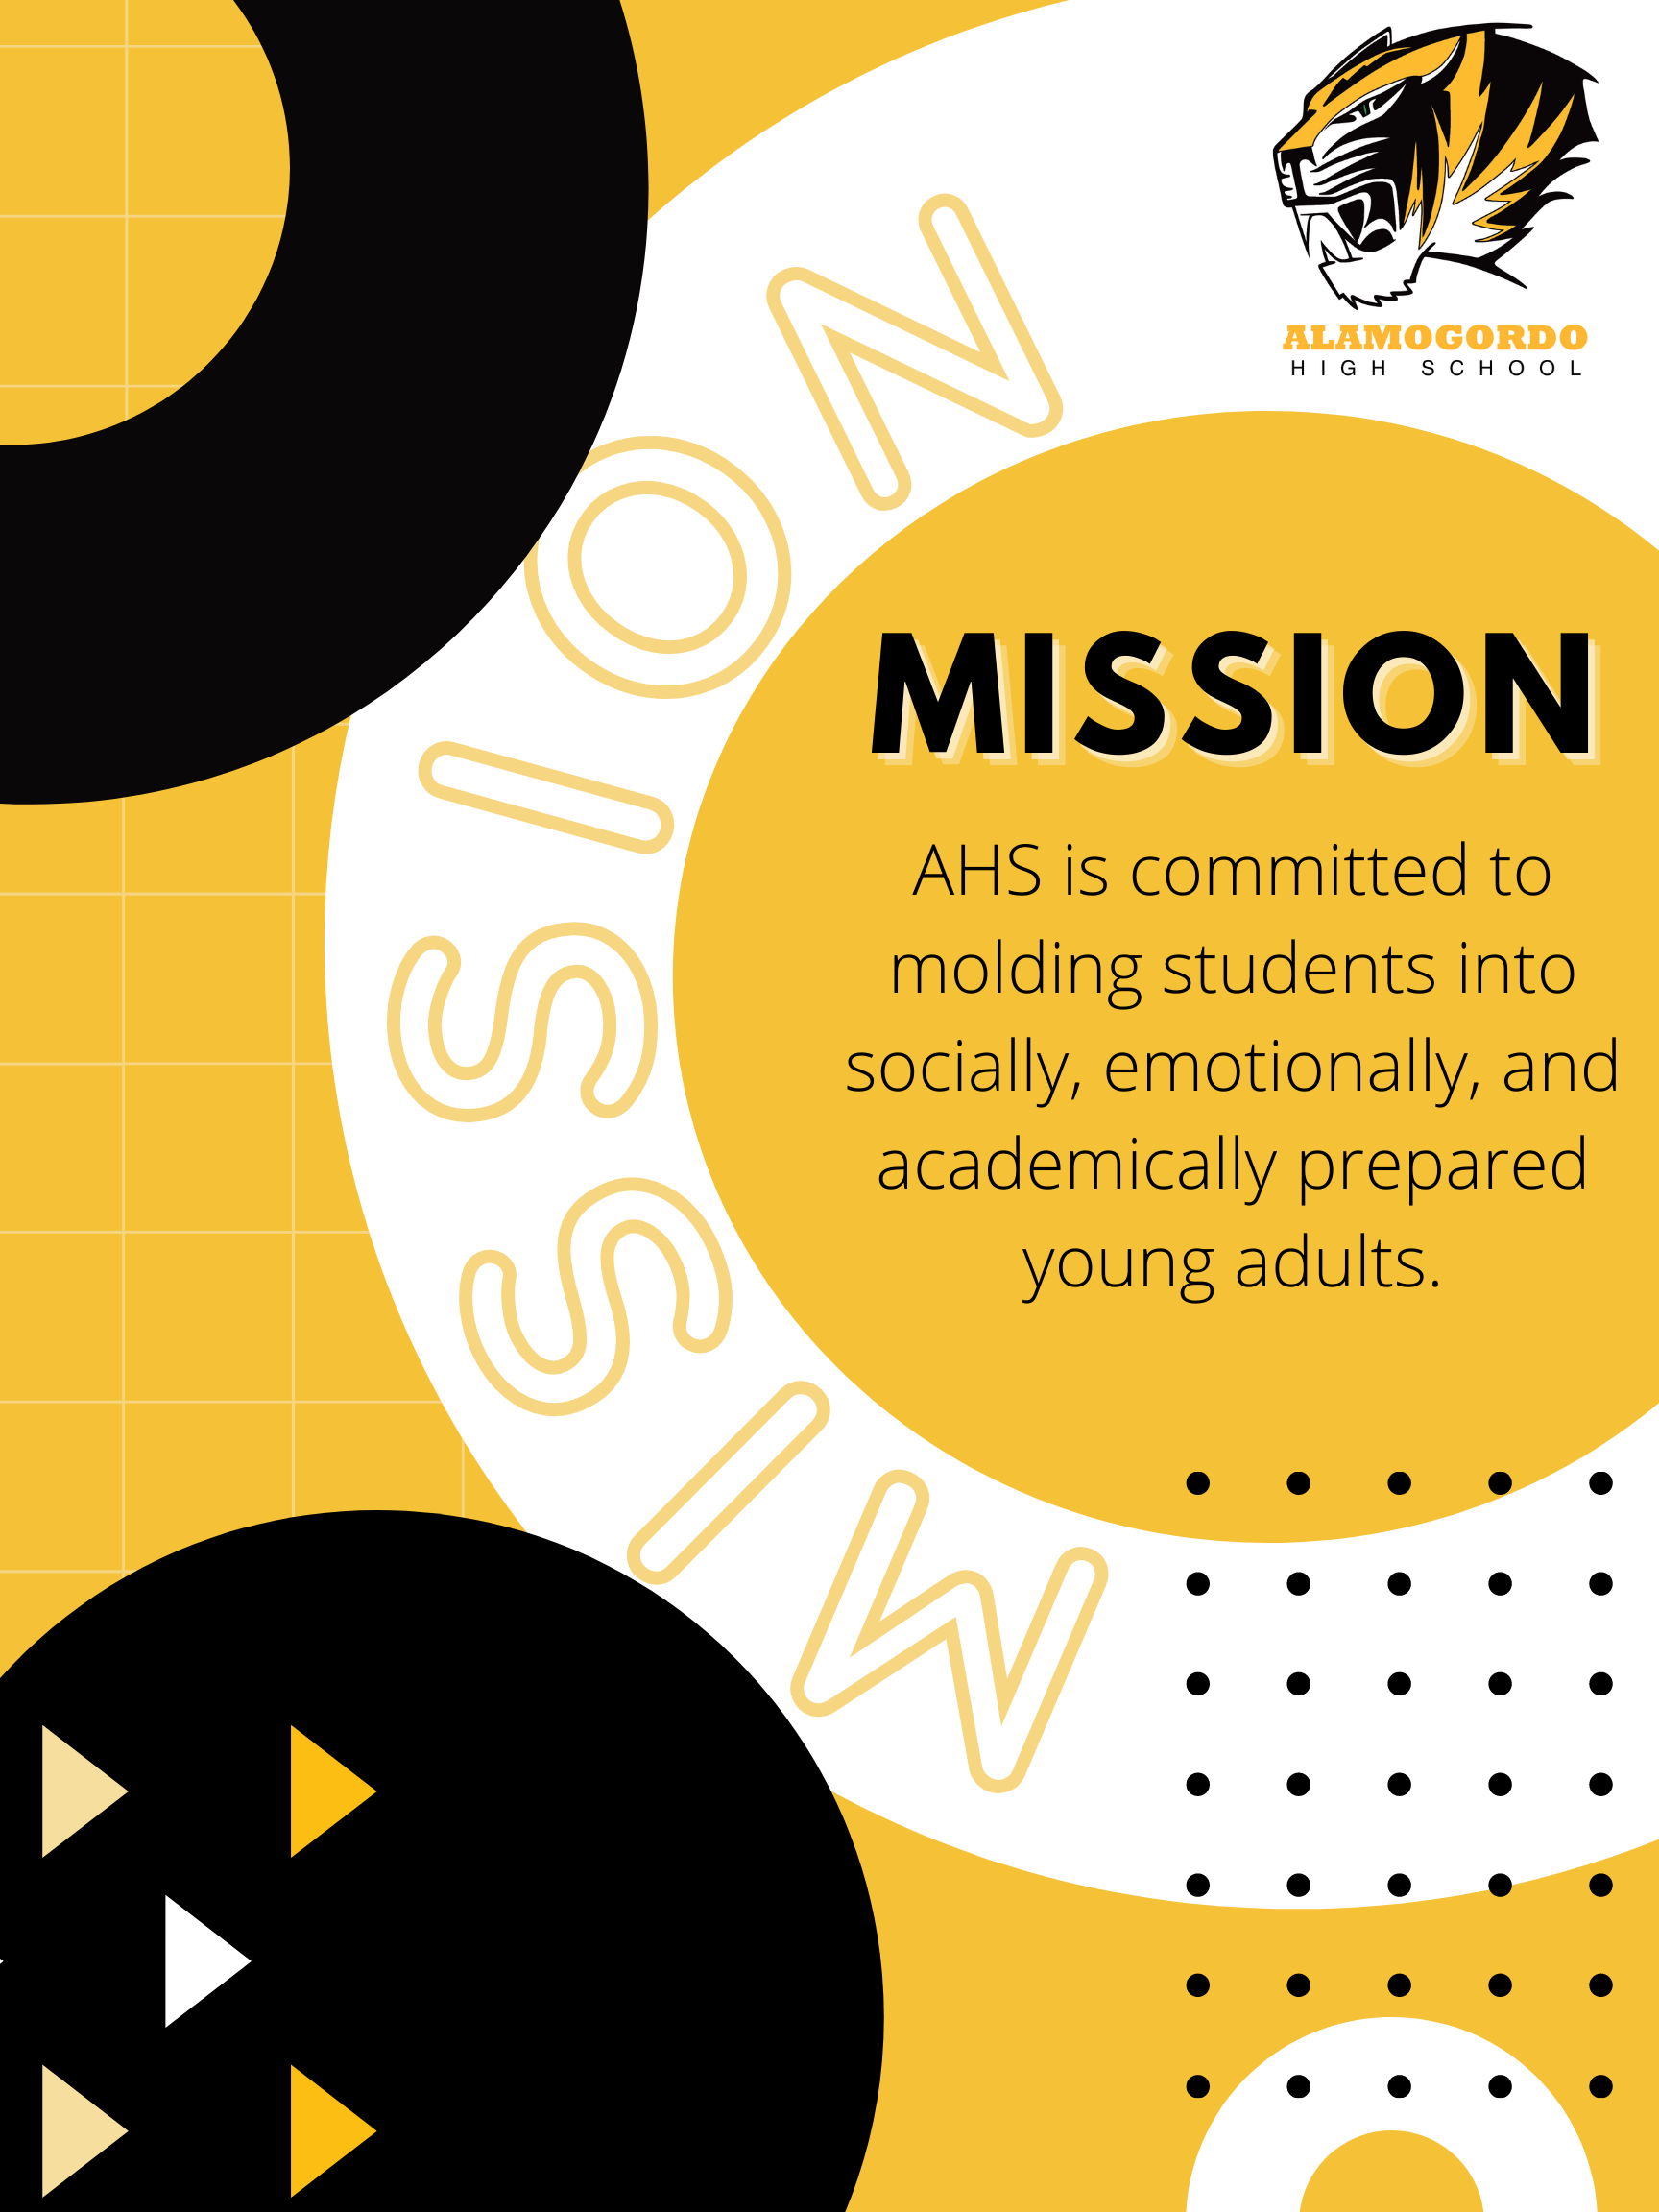 AHS Mission: AHS is committed to molding students into socially, emotionally, and academically prepared young adults. 